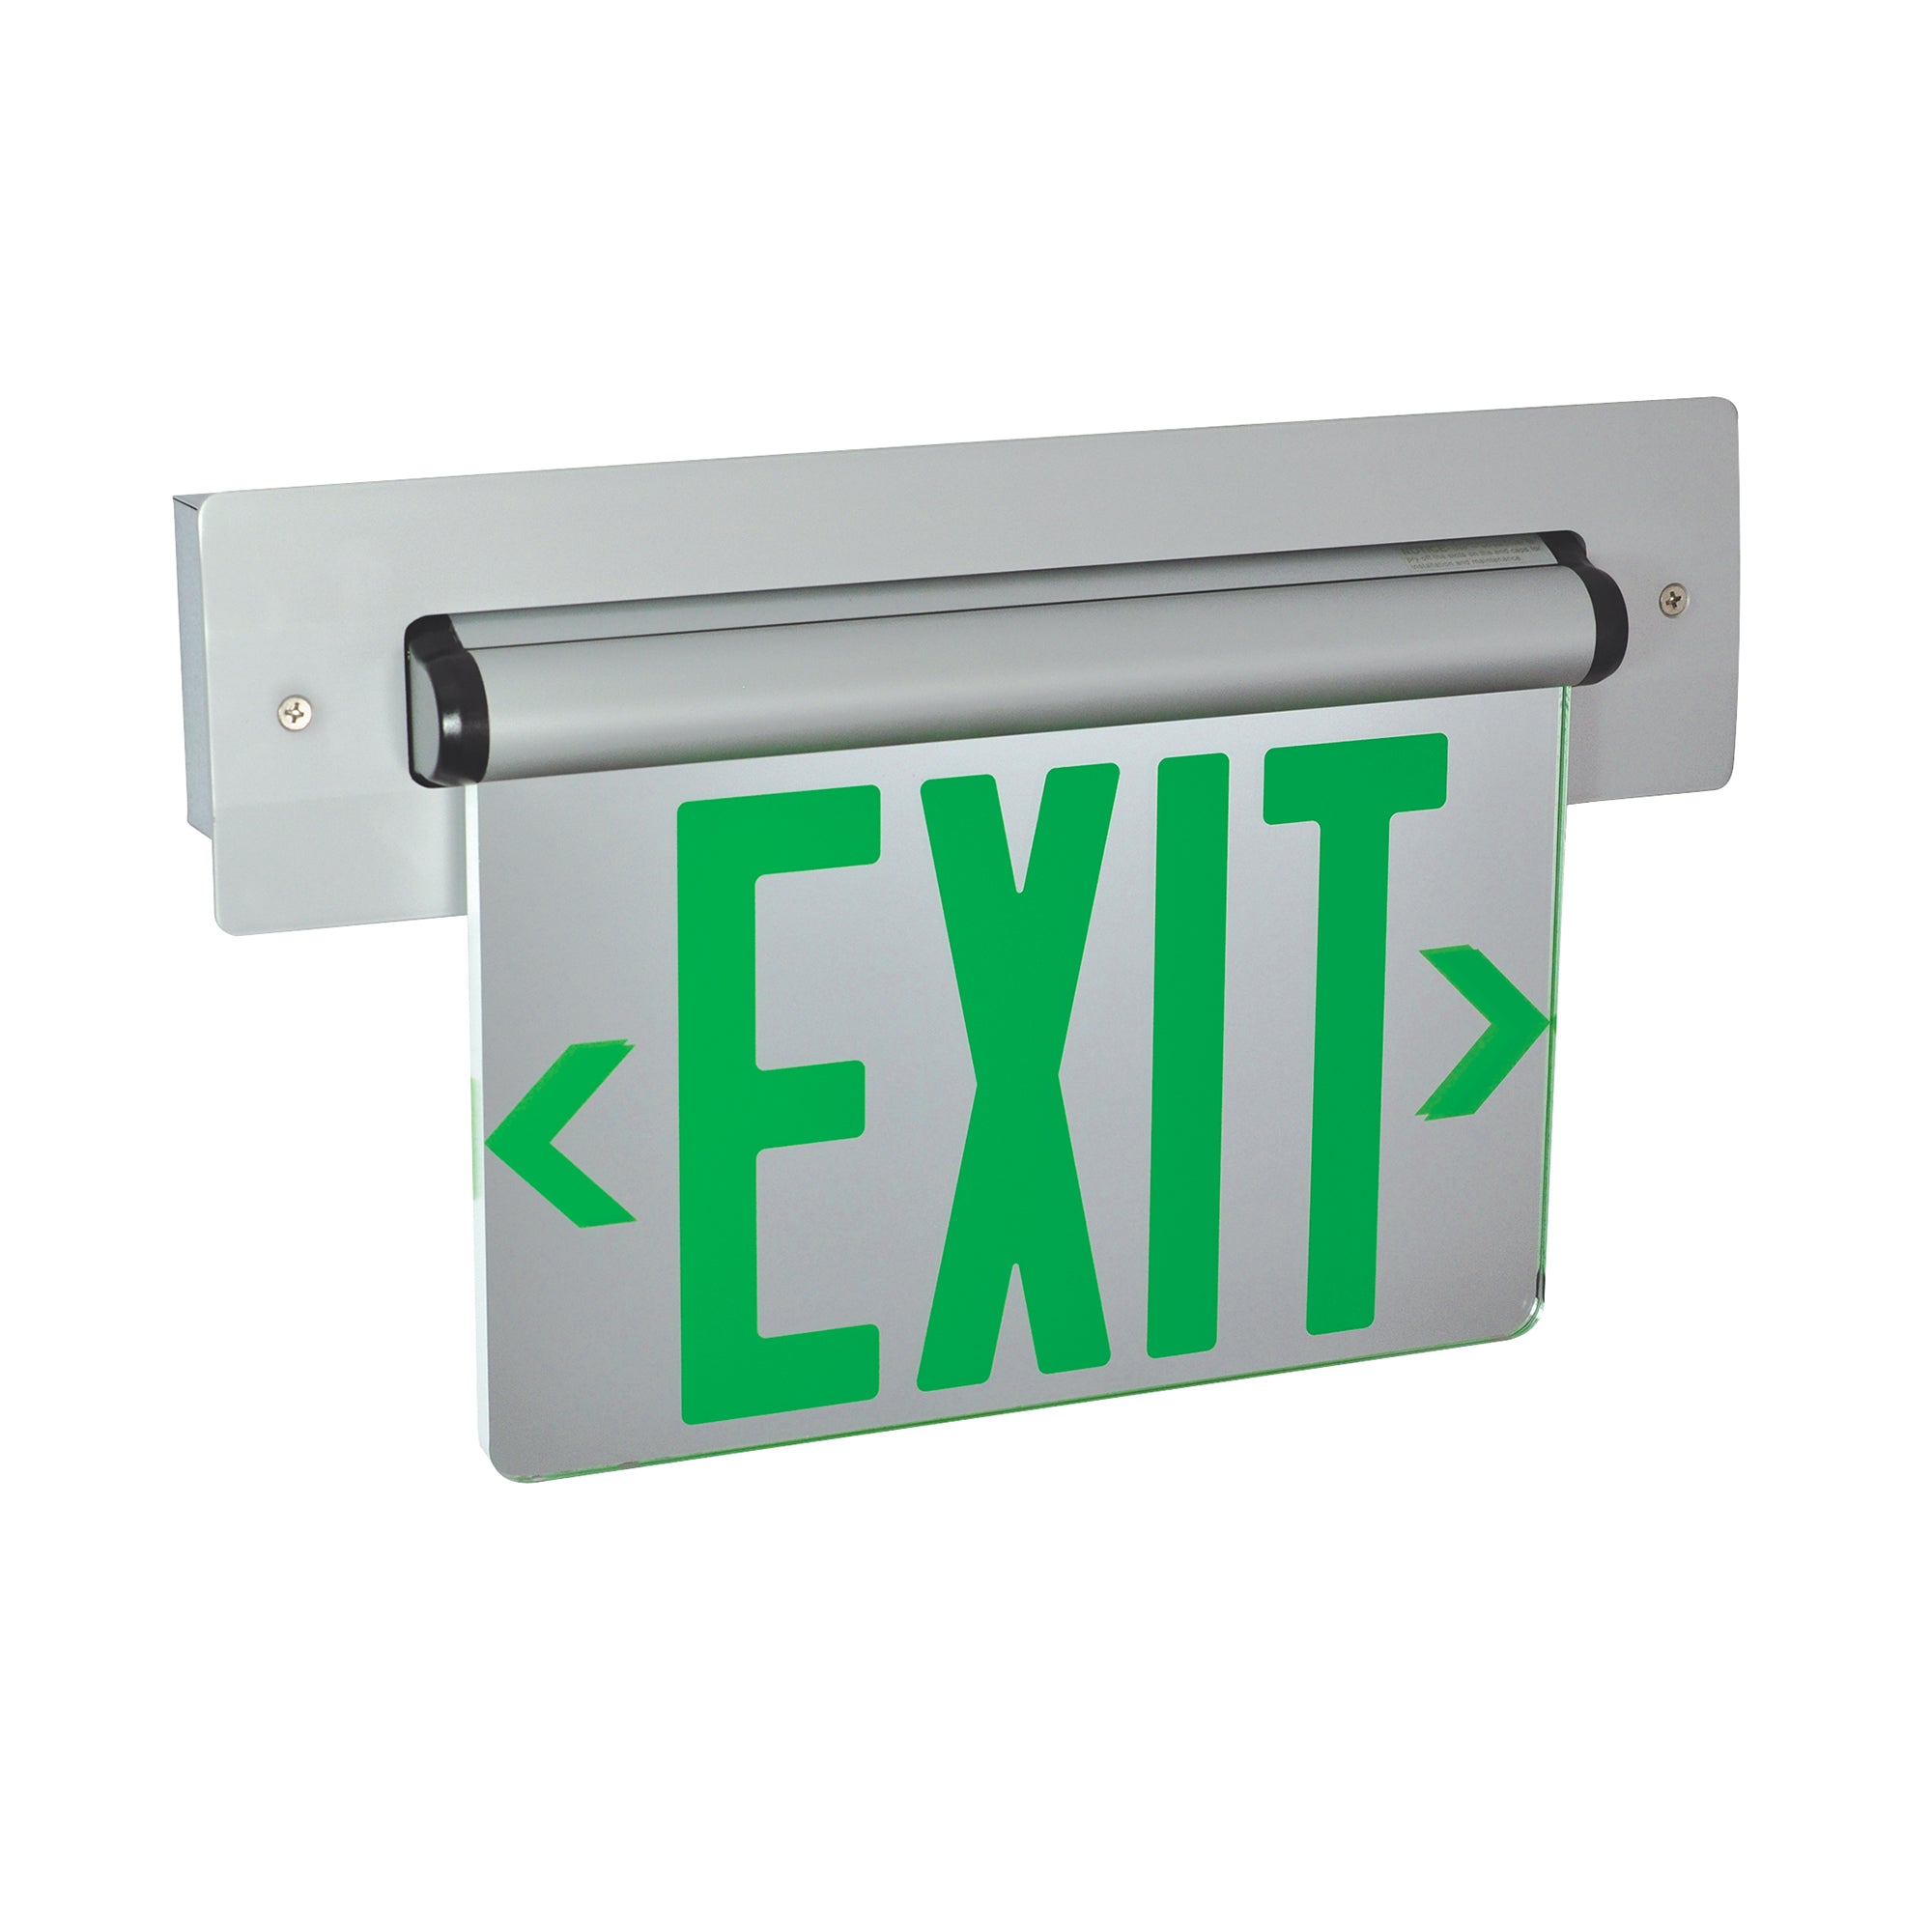 Nora Lighting NX-814-LEDGMA - Exit / Emergency - Recessed Adjustable LED Edge-Lit Exit Sign, 2 Circuit, 6 Inch Green Letters, Single Face / Mirrored Acrylic, Aluminum Housing